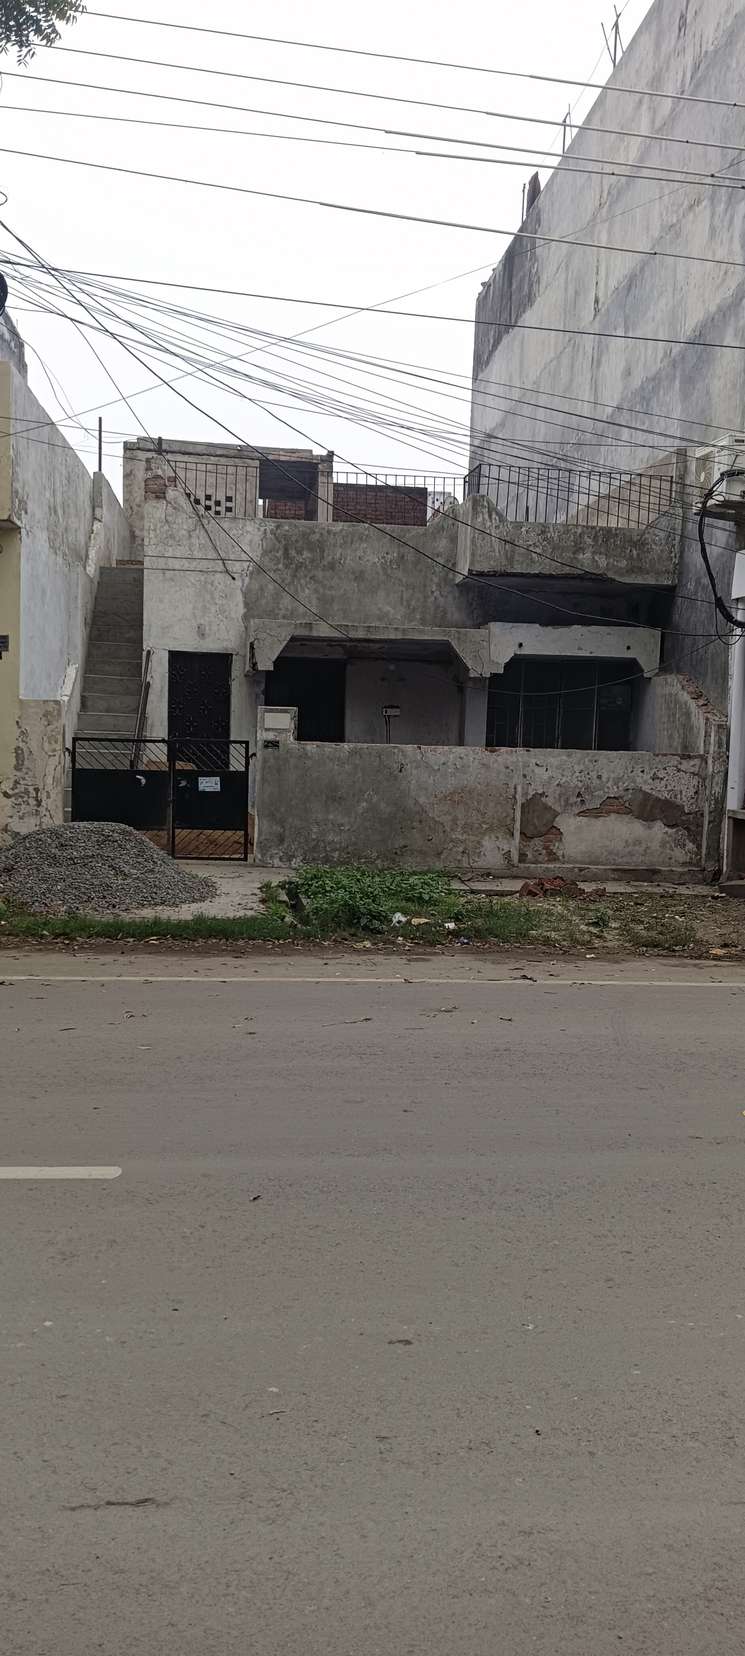 Lda Colony Lucknow Sector D 1 Condition House West Facing 18 Mitar Road Commercial Use